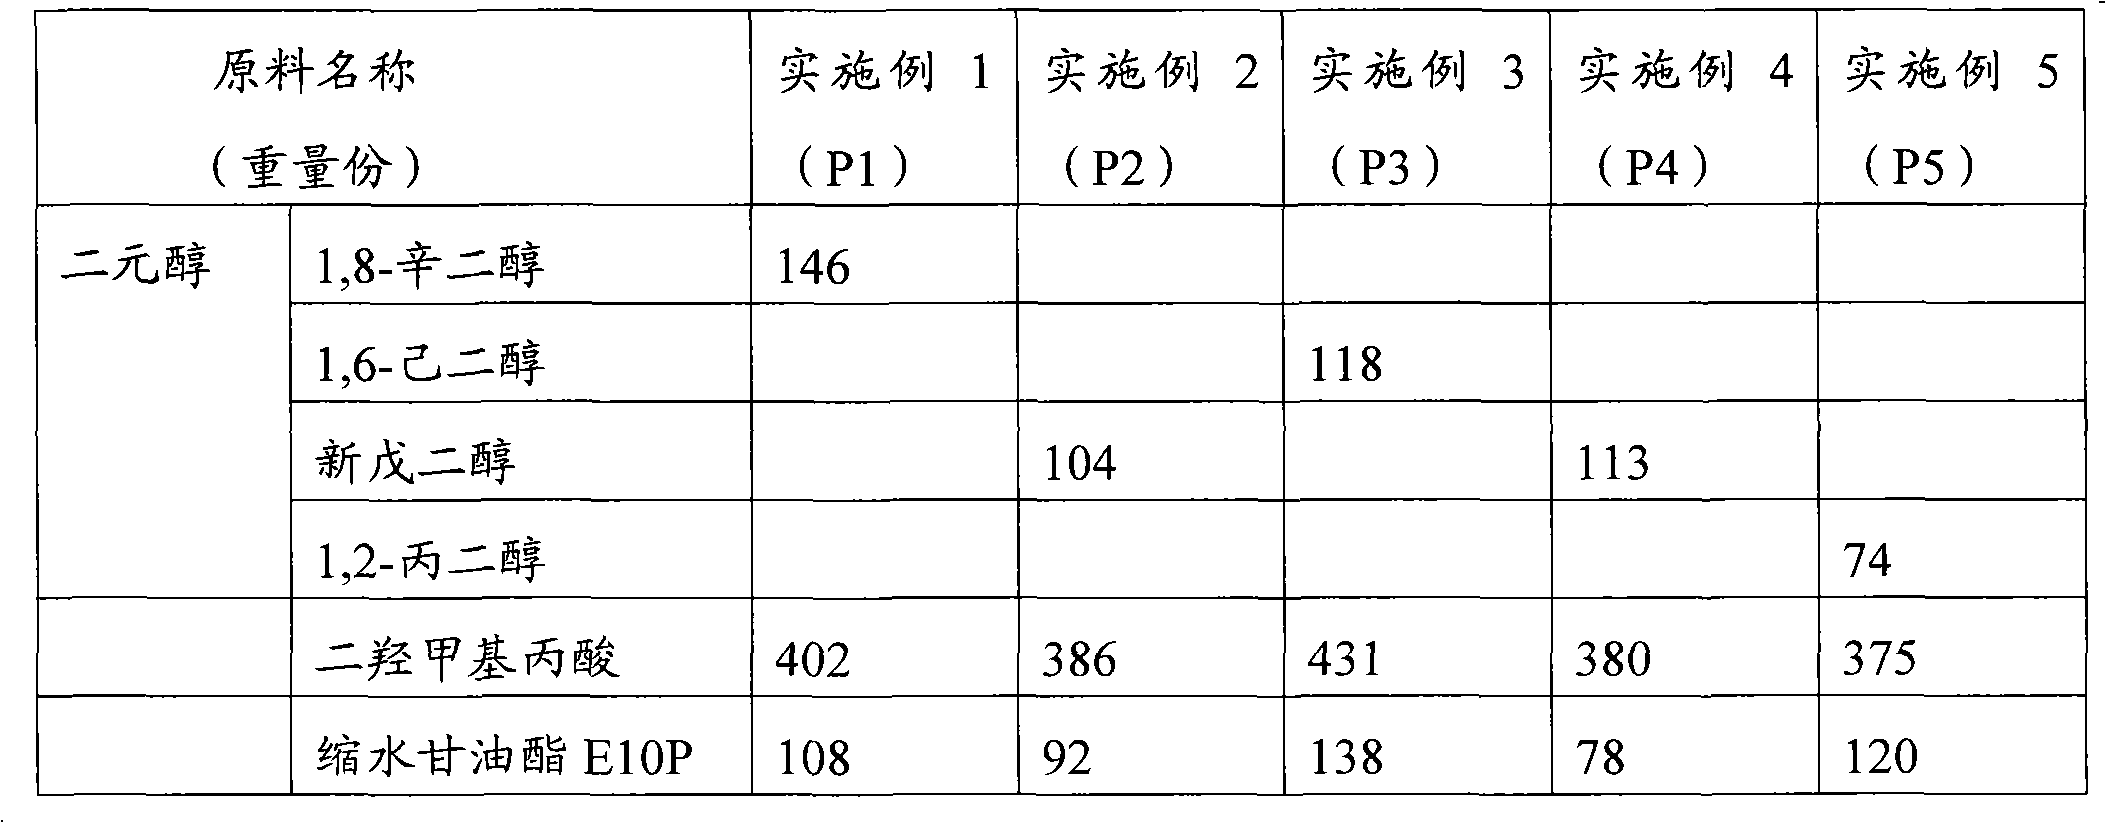 Method for preparing waterborne resin, and waterborne coating composition